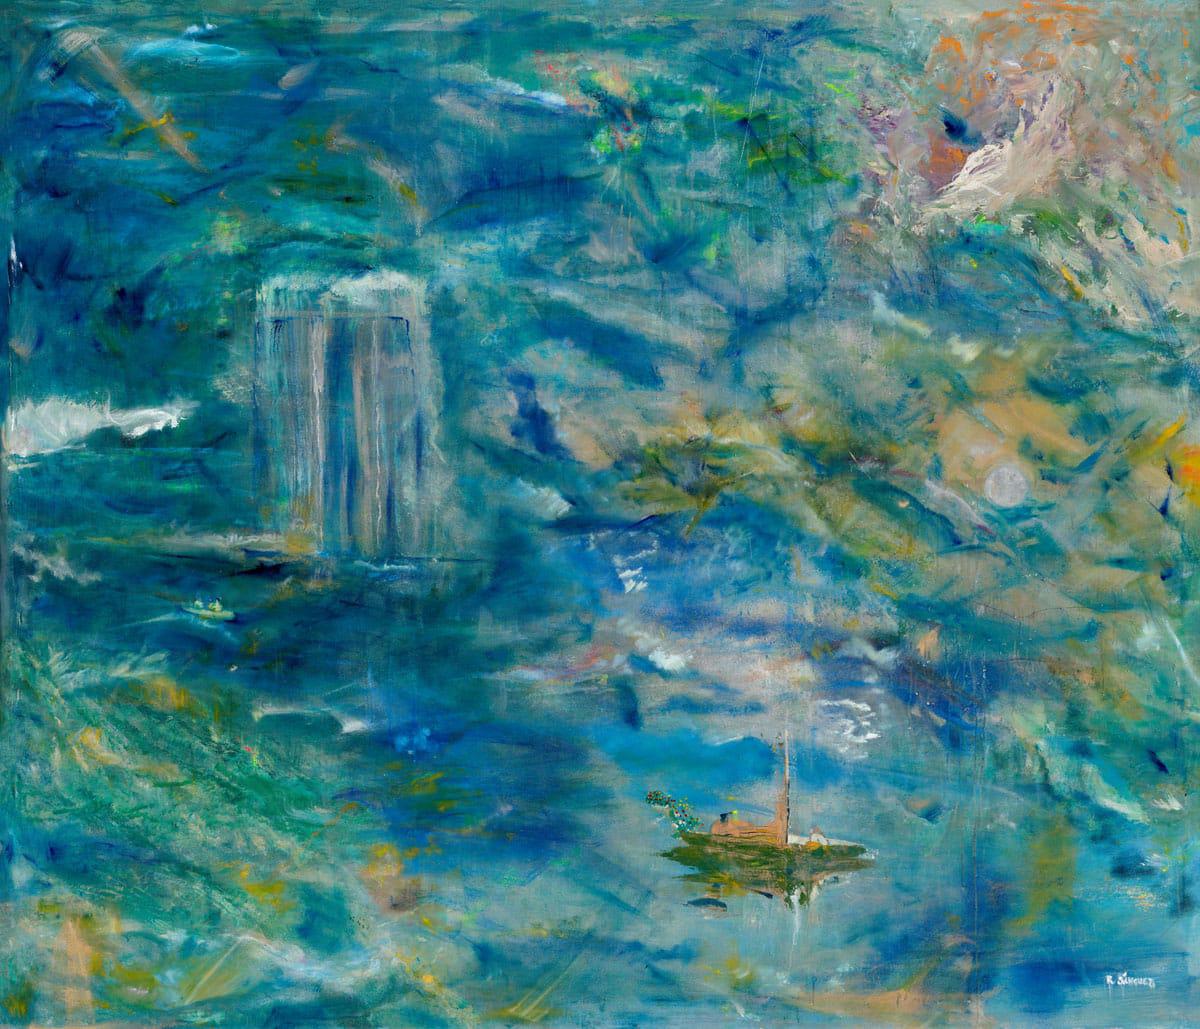 Omnipresence , 2018-21  oil on canvas   170 x 204 cm 67 x 80 in